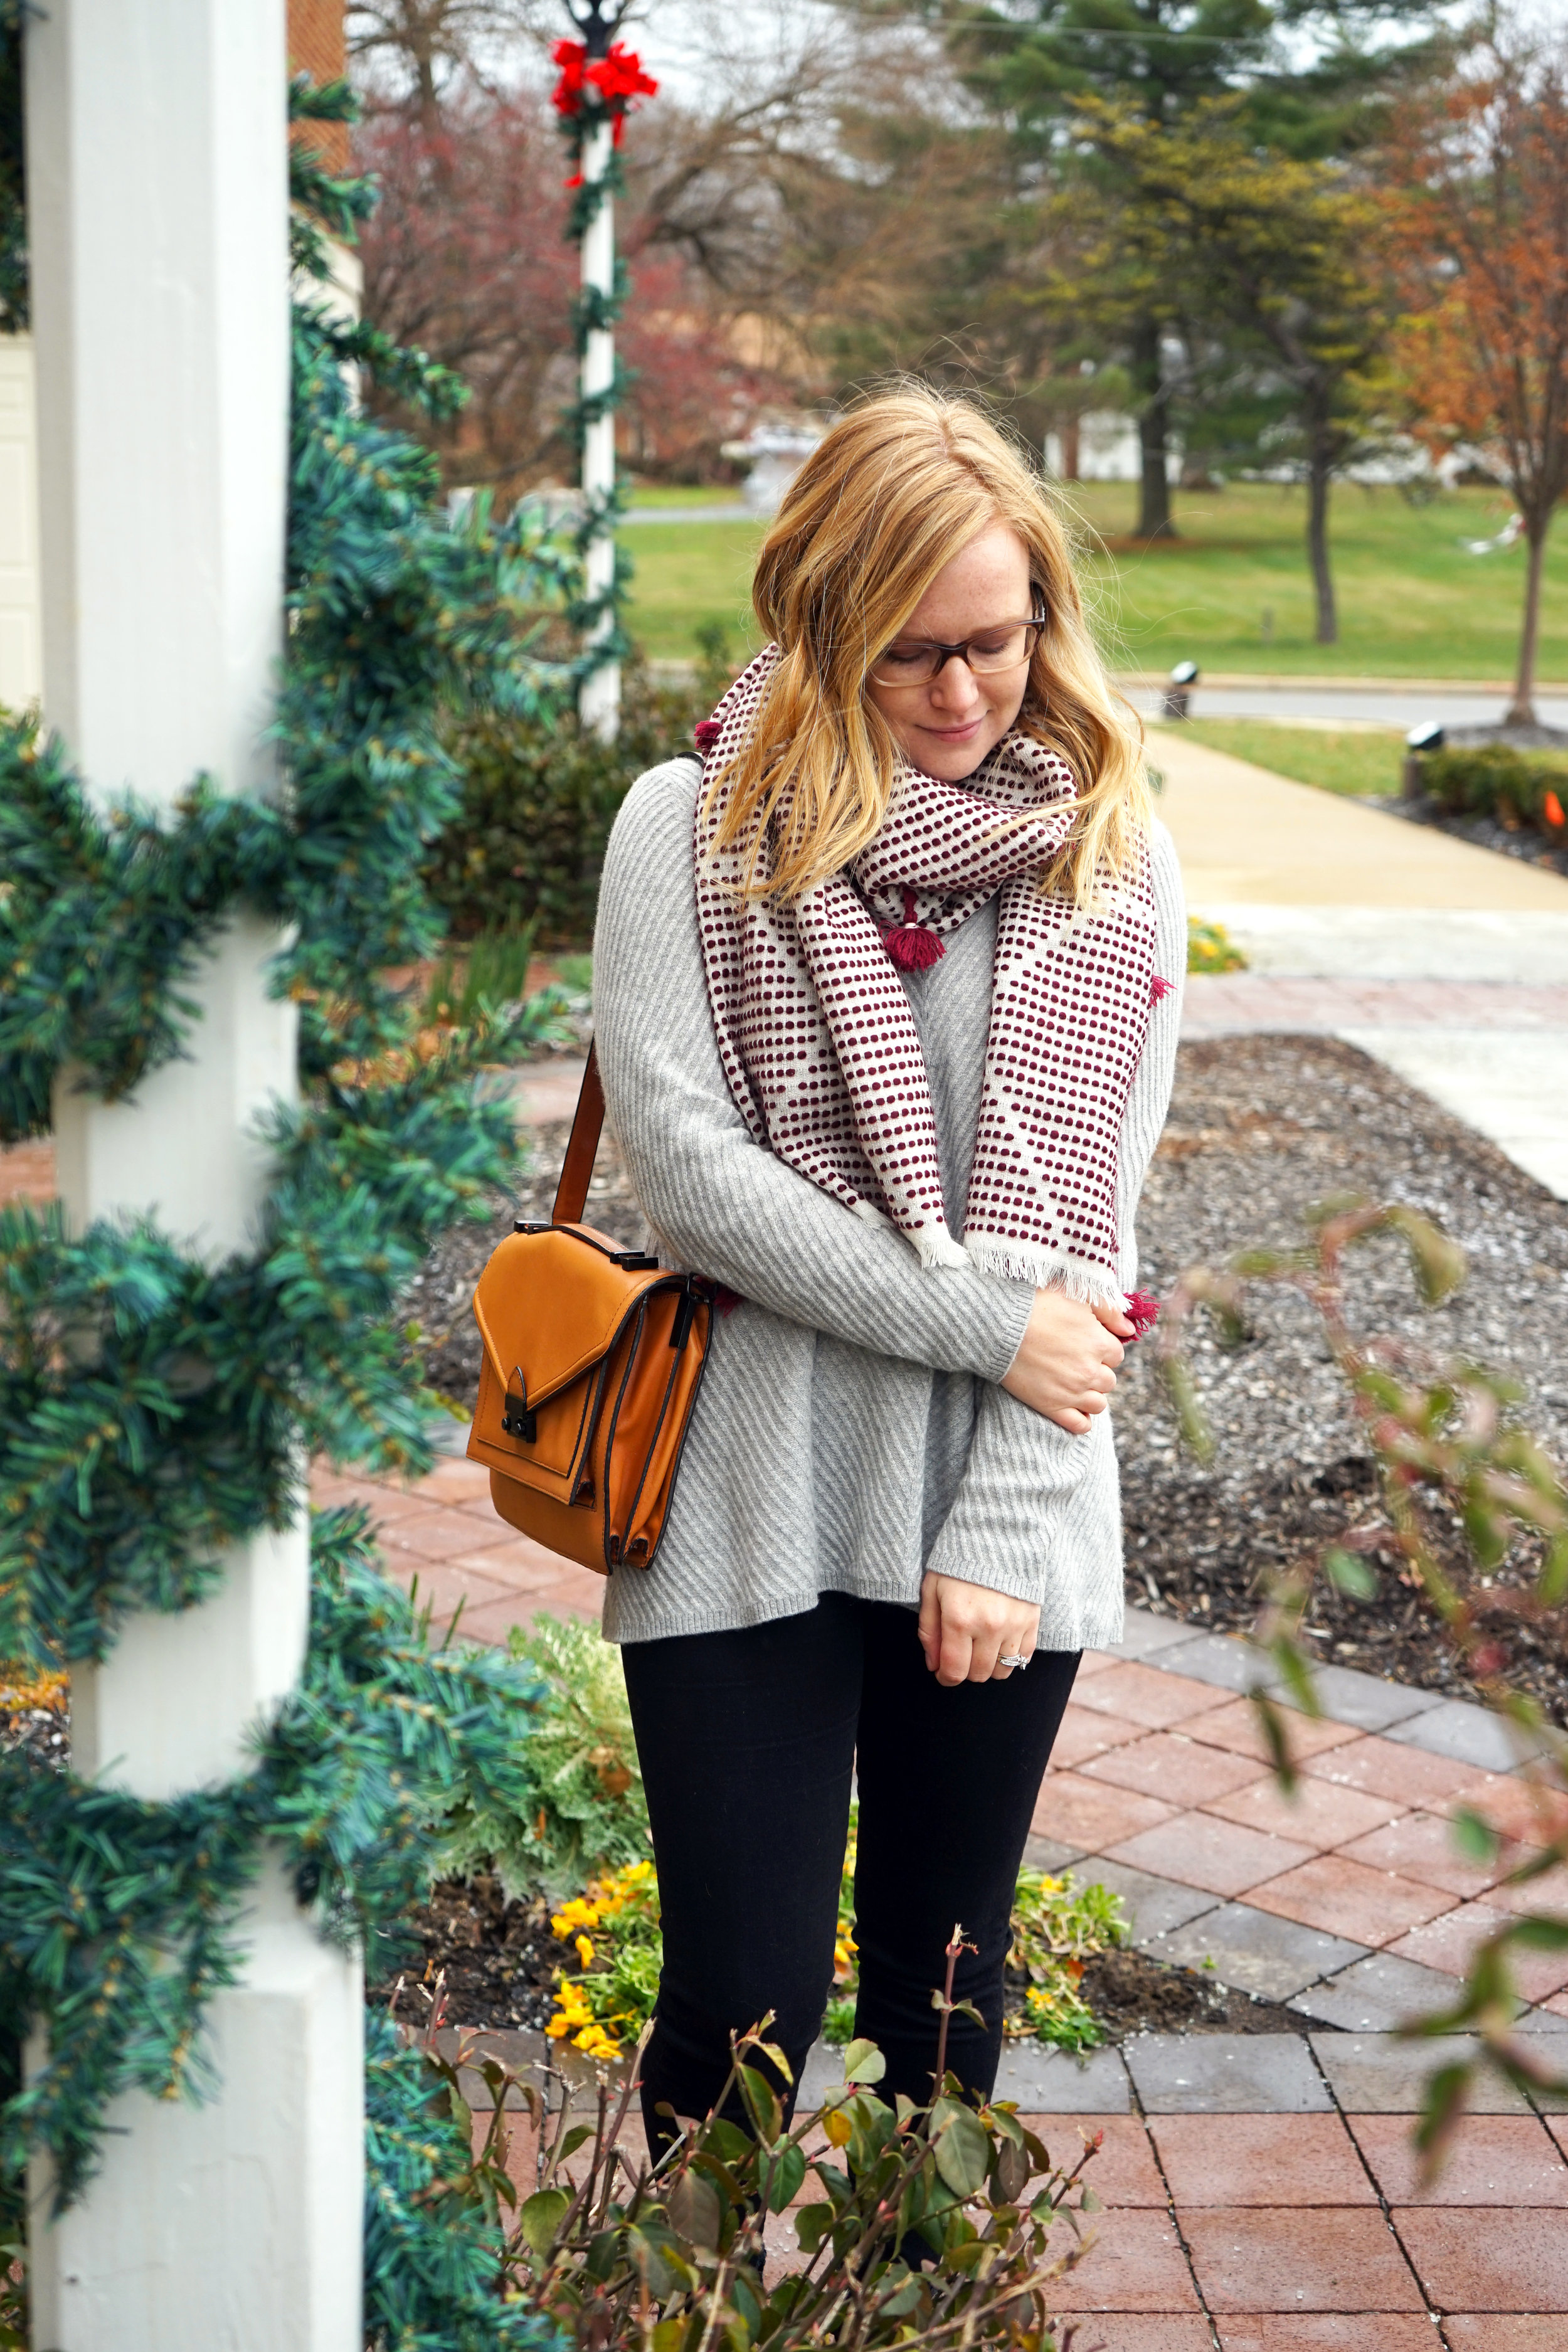 Maggie a la Mode - Madewell Diamond-Dash Tassel Scarf, Nordstrom Collection Chevron Cashmere Sweater, AG High-Waisted Skinny Jeans, Loeffler Randall Rider Bag